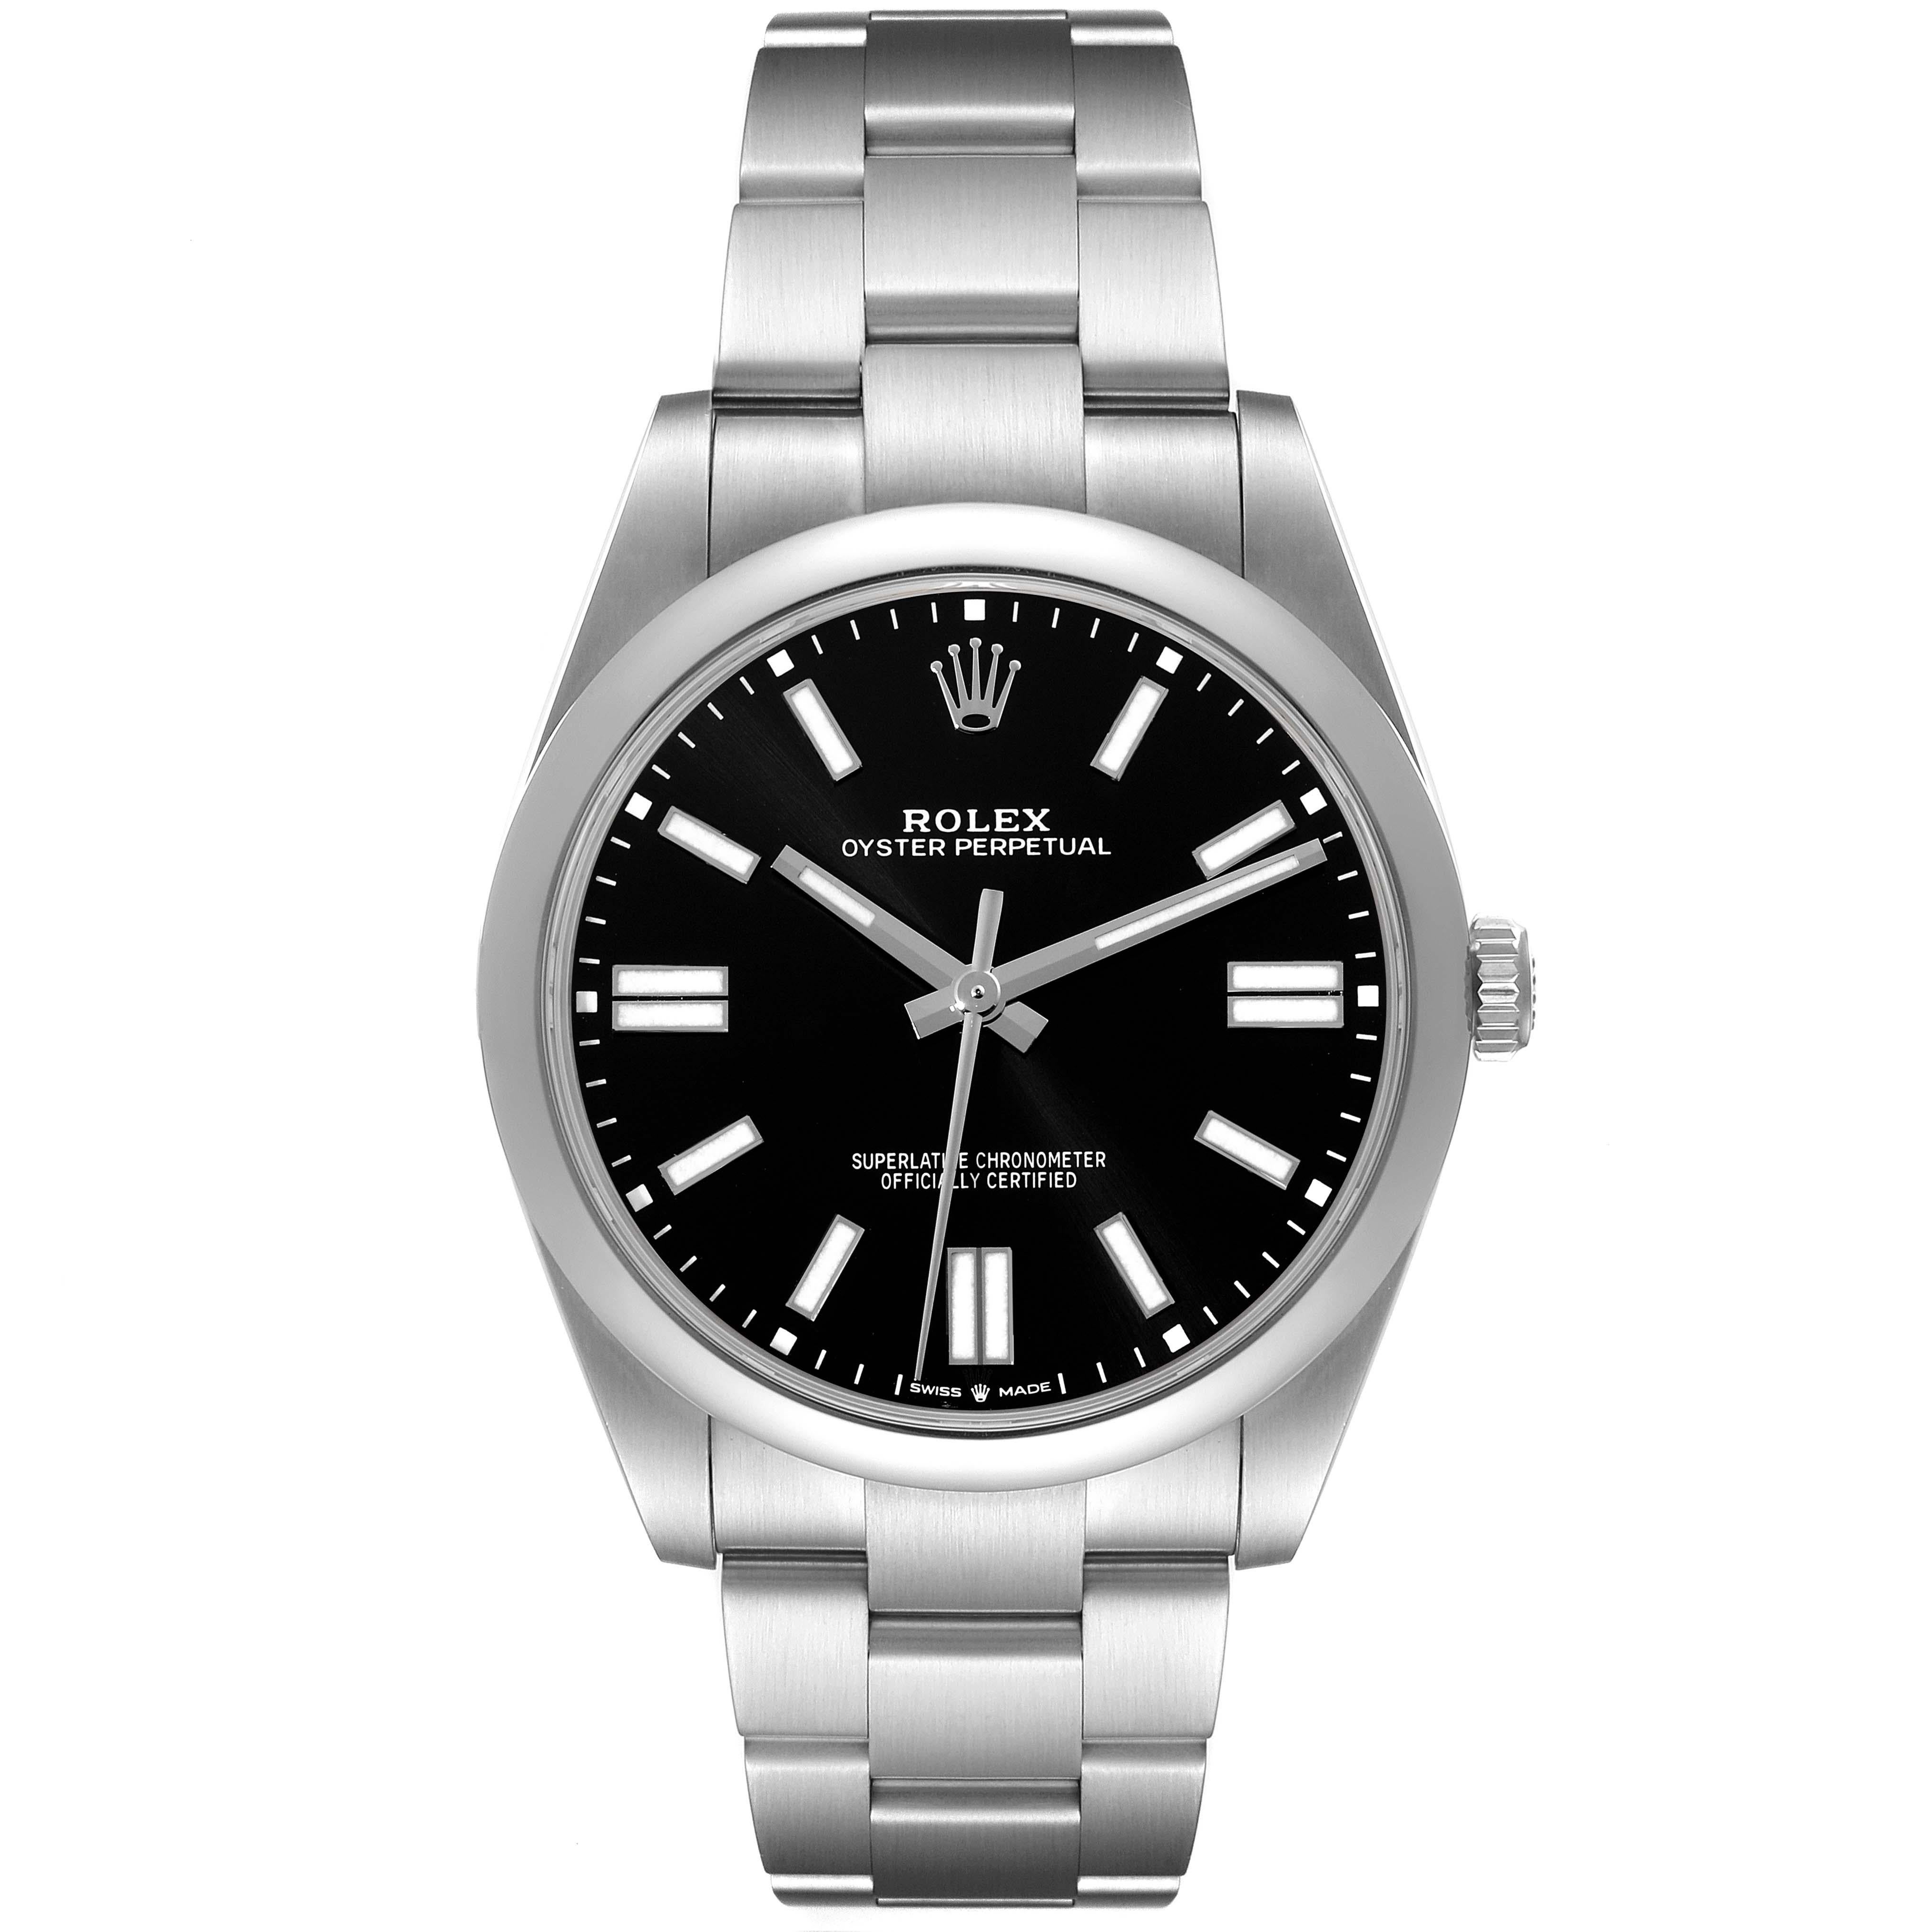 Rolex Oyster Perpetual 41mm Black Dial Steel Mens Watch 124300 Box Card. Officially certified chronometer automatic self-winding movement. Stainless steel case 41 mm in diameter. Rolex logo on the crown. Stainless steel smooth domed bezel. Scratch